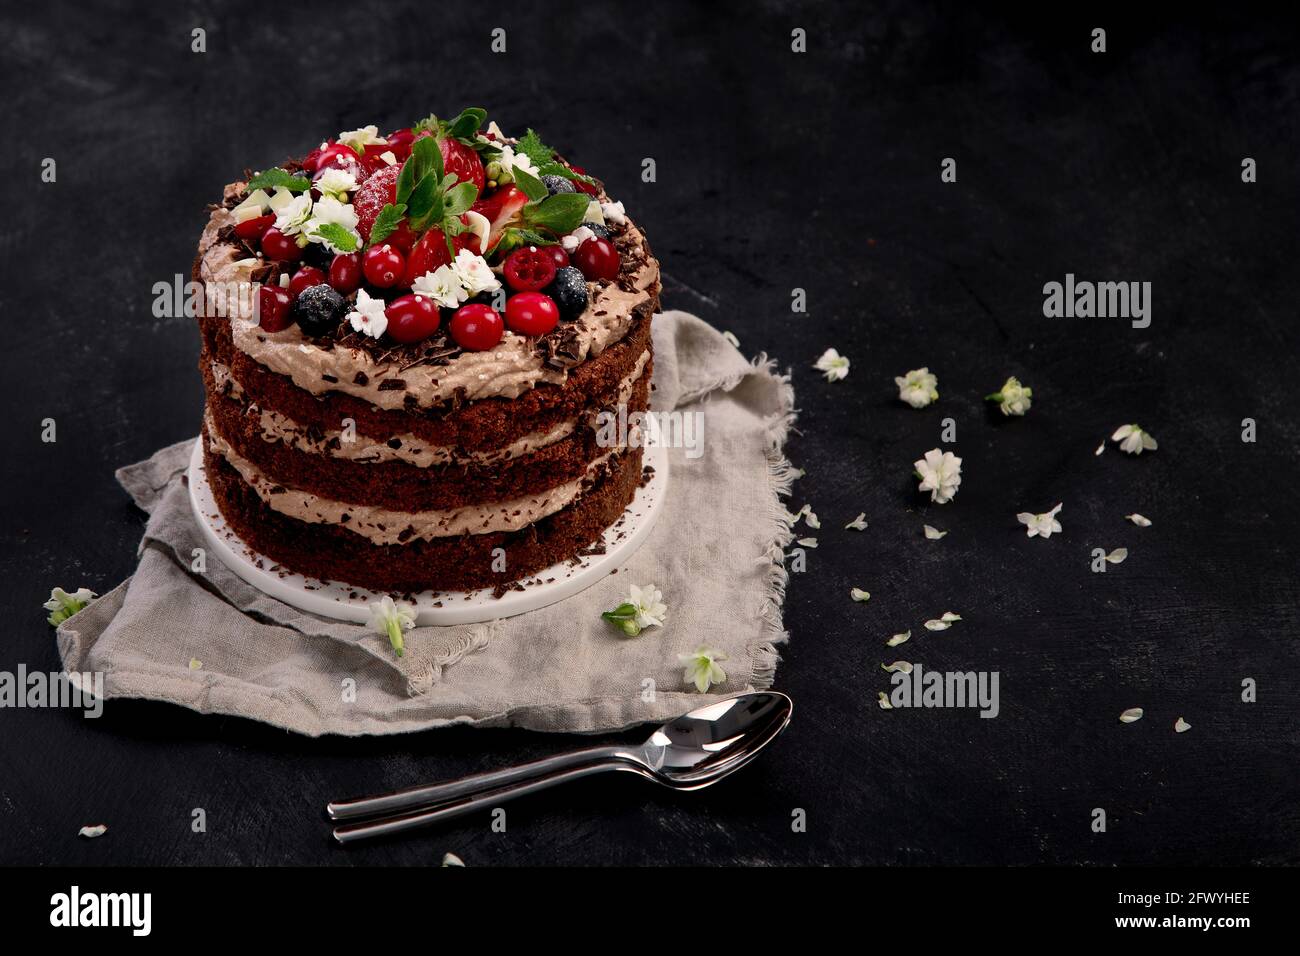 Delicious homemade chocolate cake with fresh berries and mascarpone cream on dark background. Top view, copy space Stock Photo